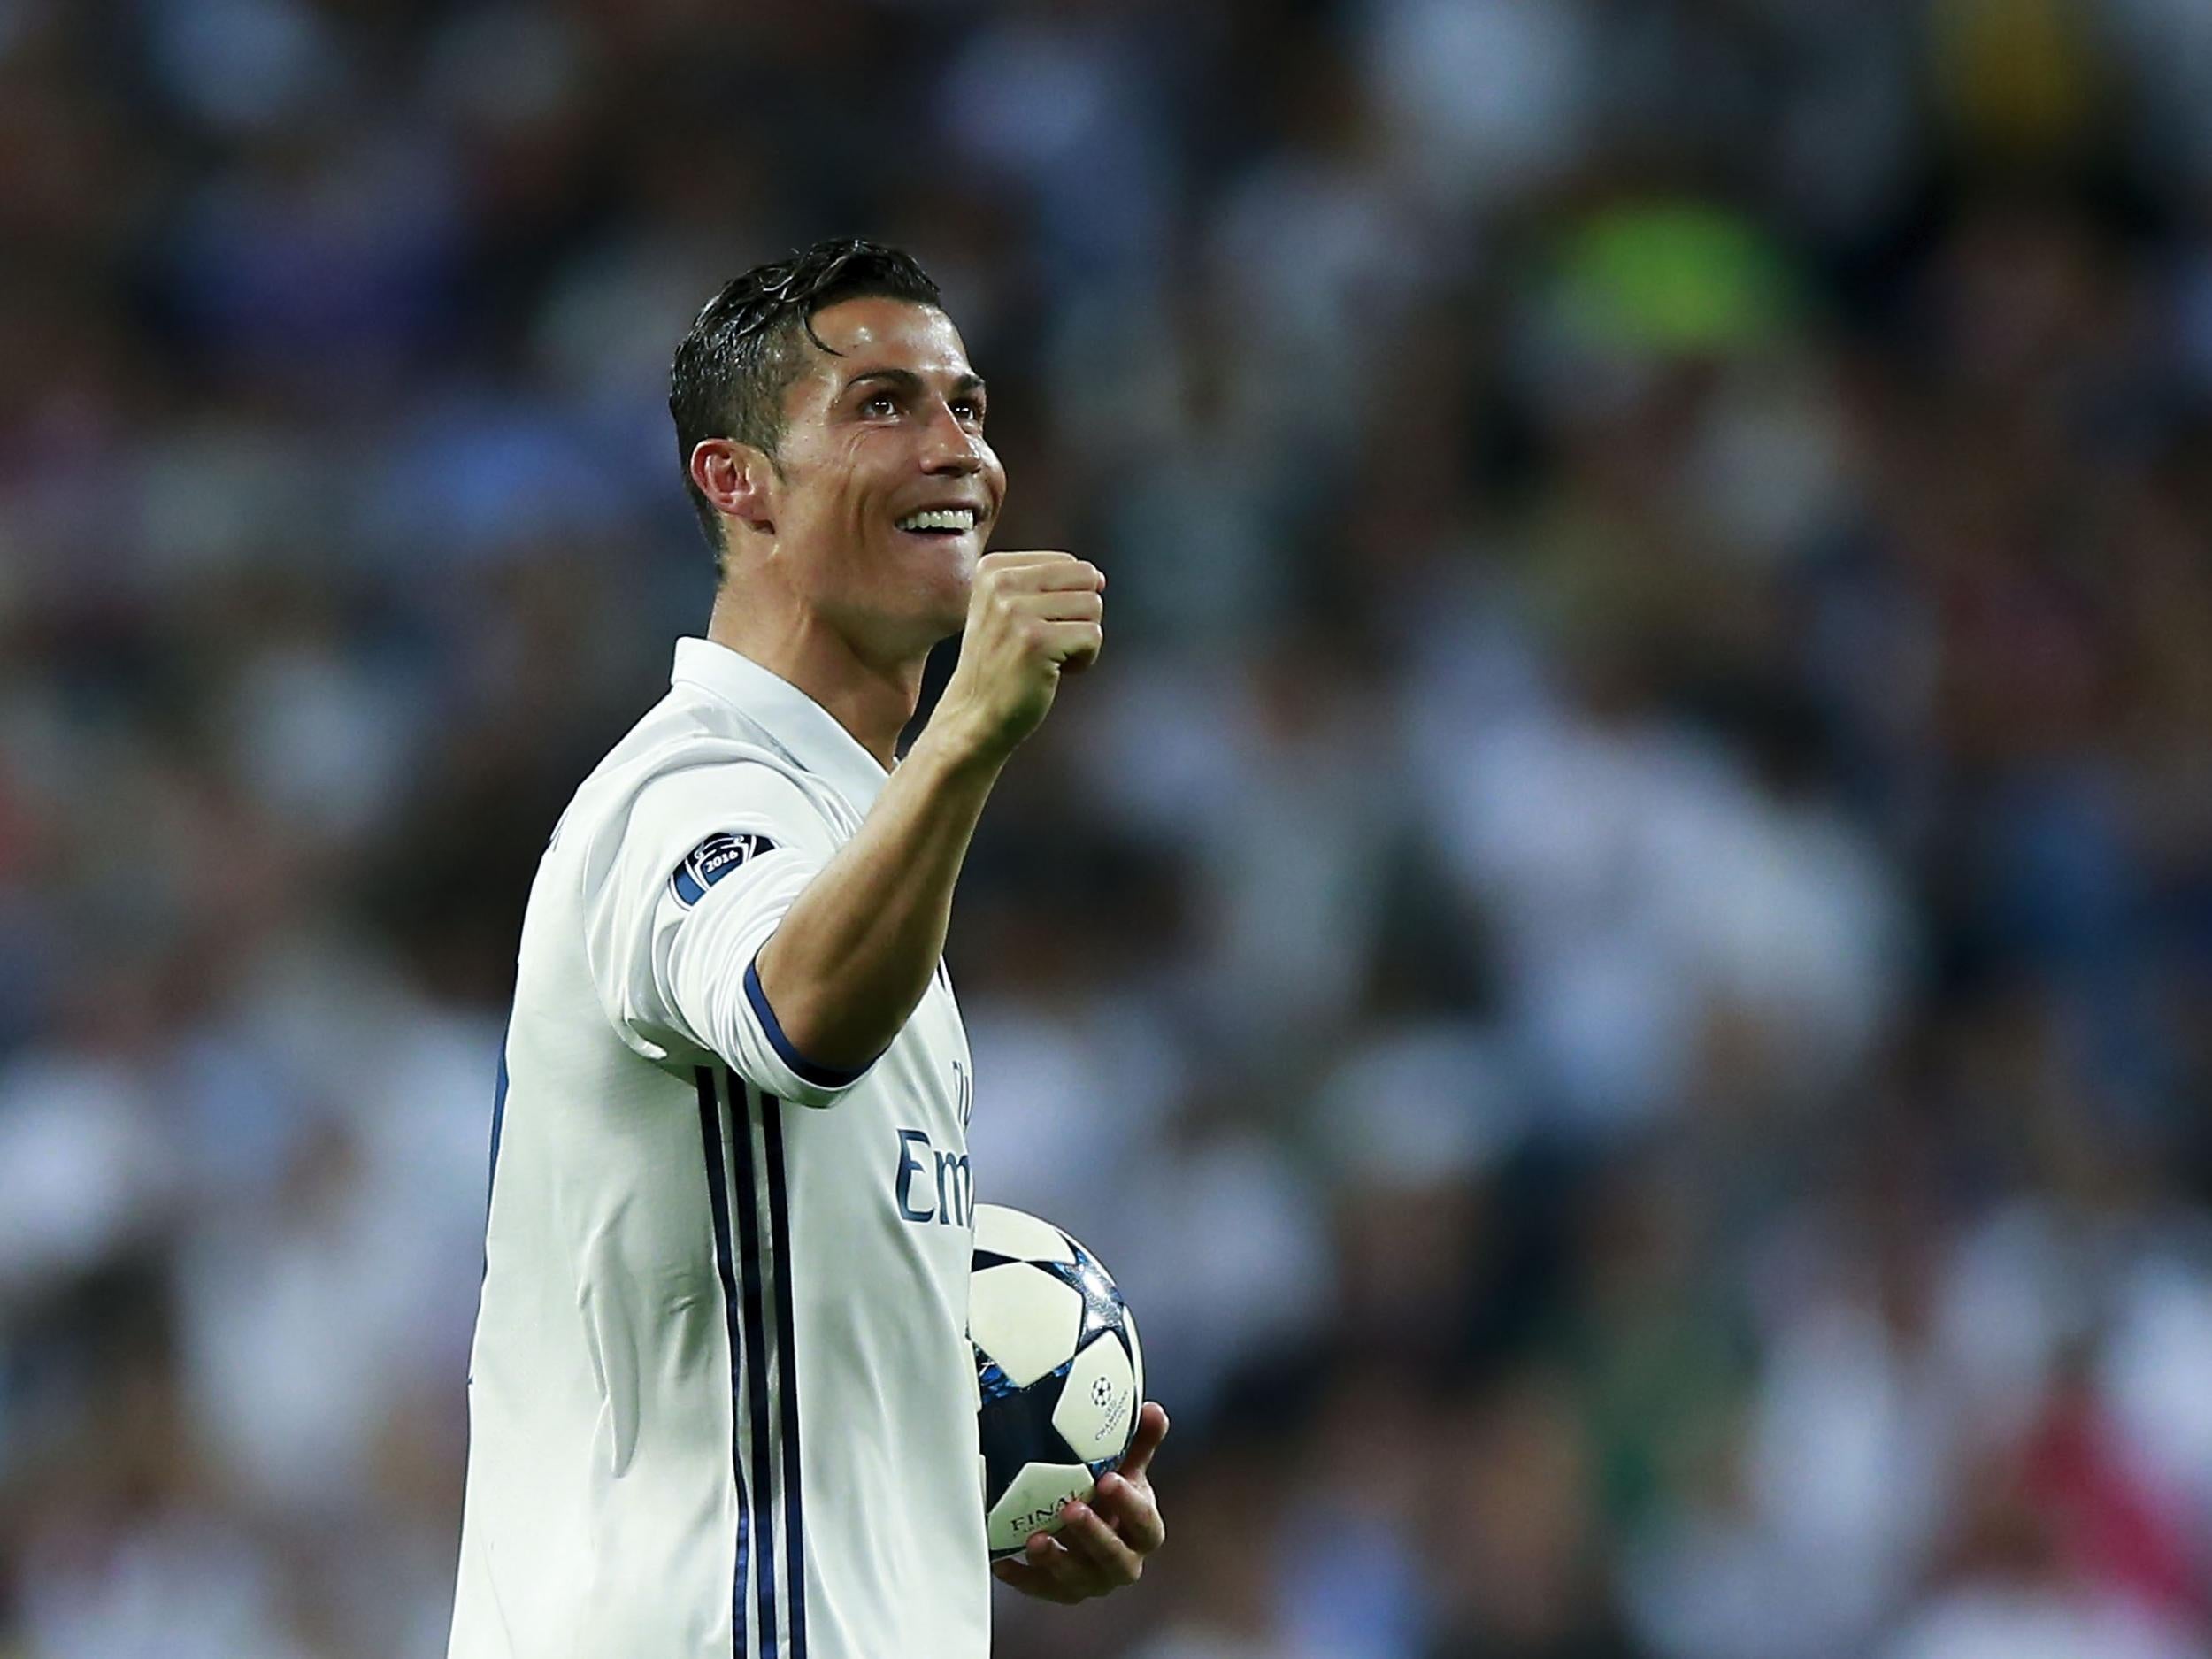 Ronaldo scored five of Madrid's six goals in their tie against Bayern